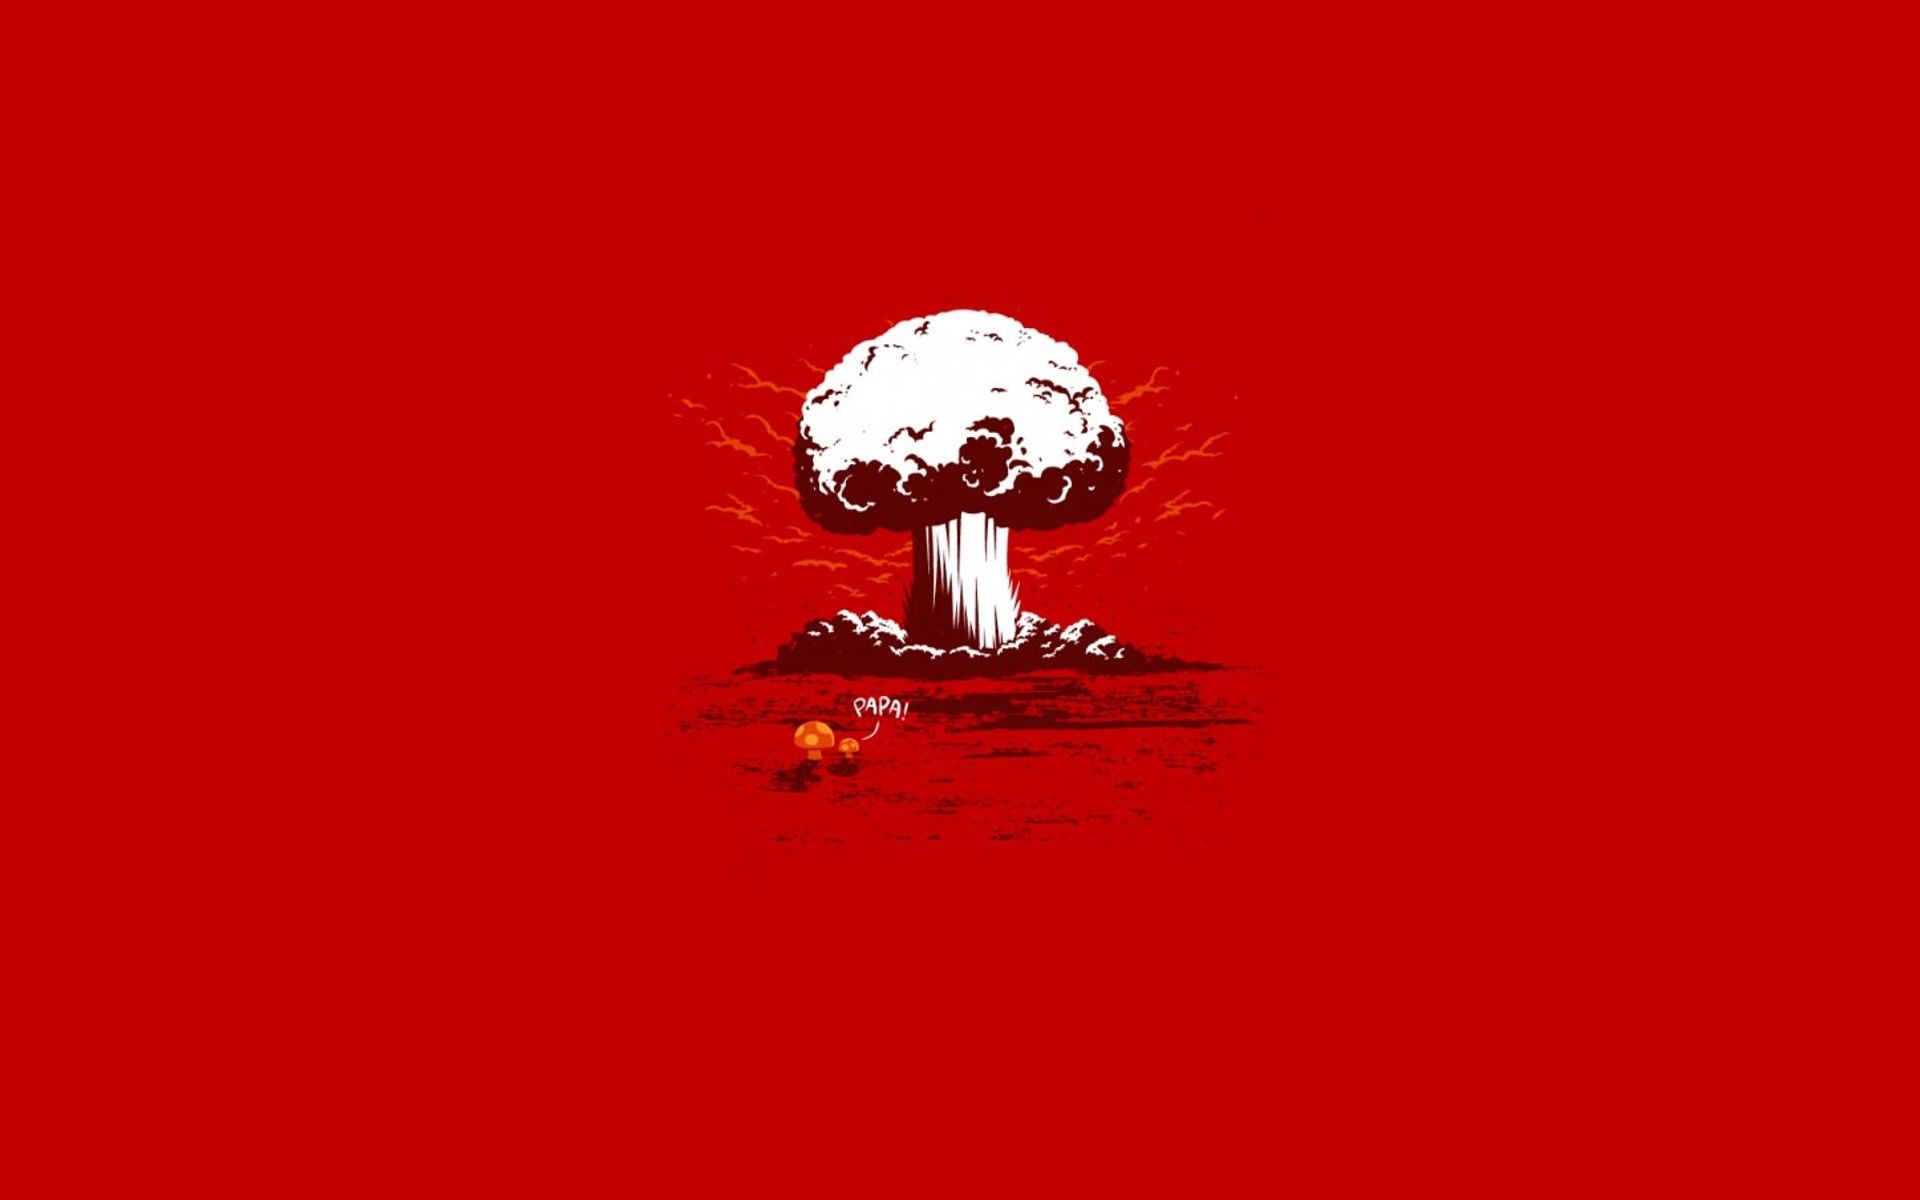 minimalistic, funny, typography, nuclear explosions, red